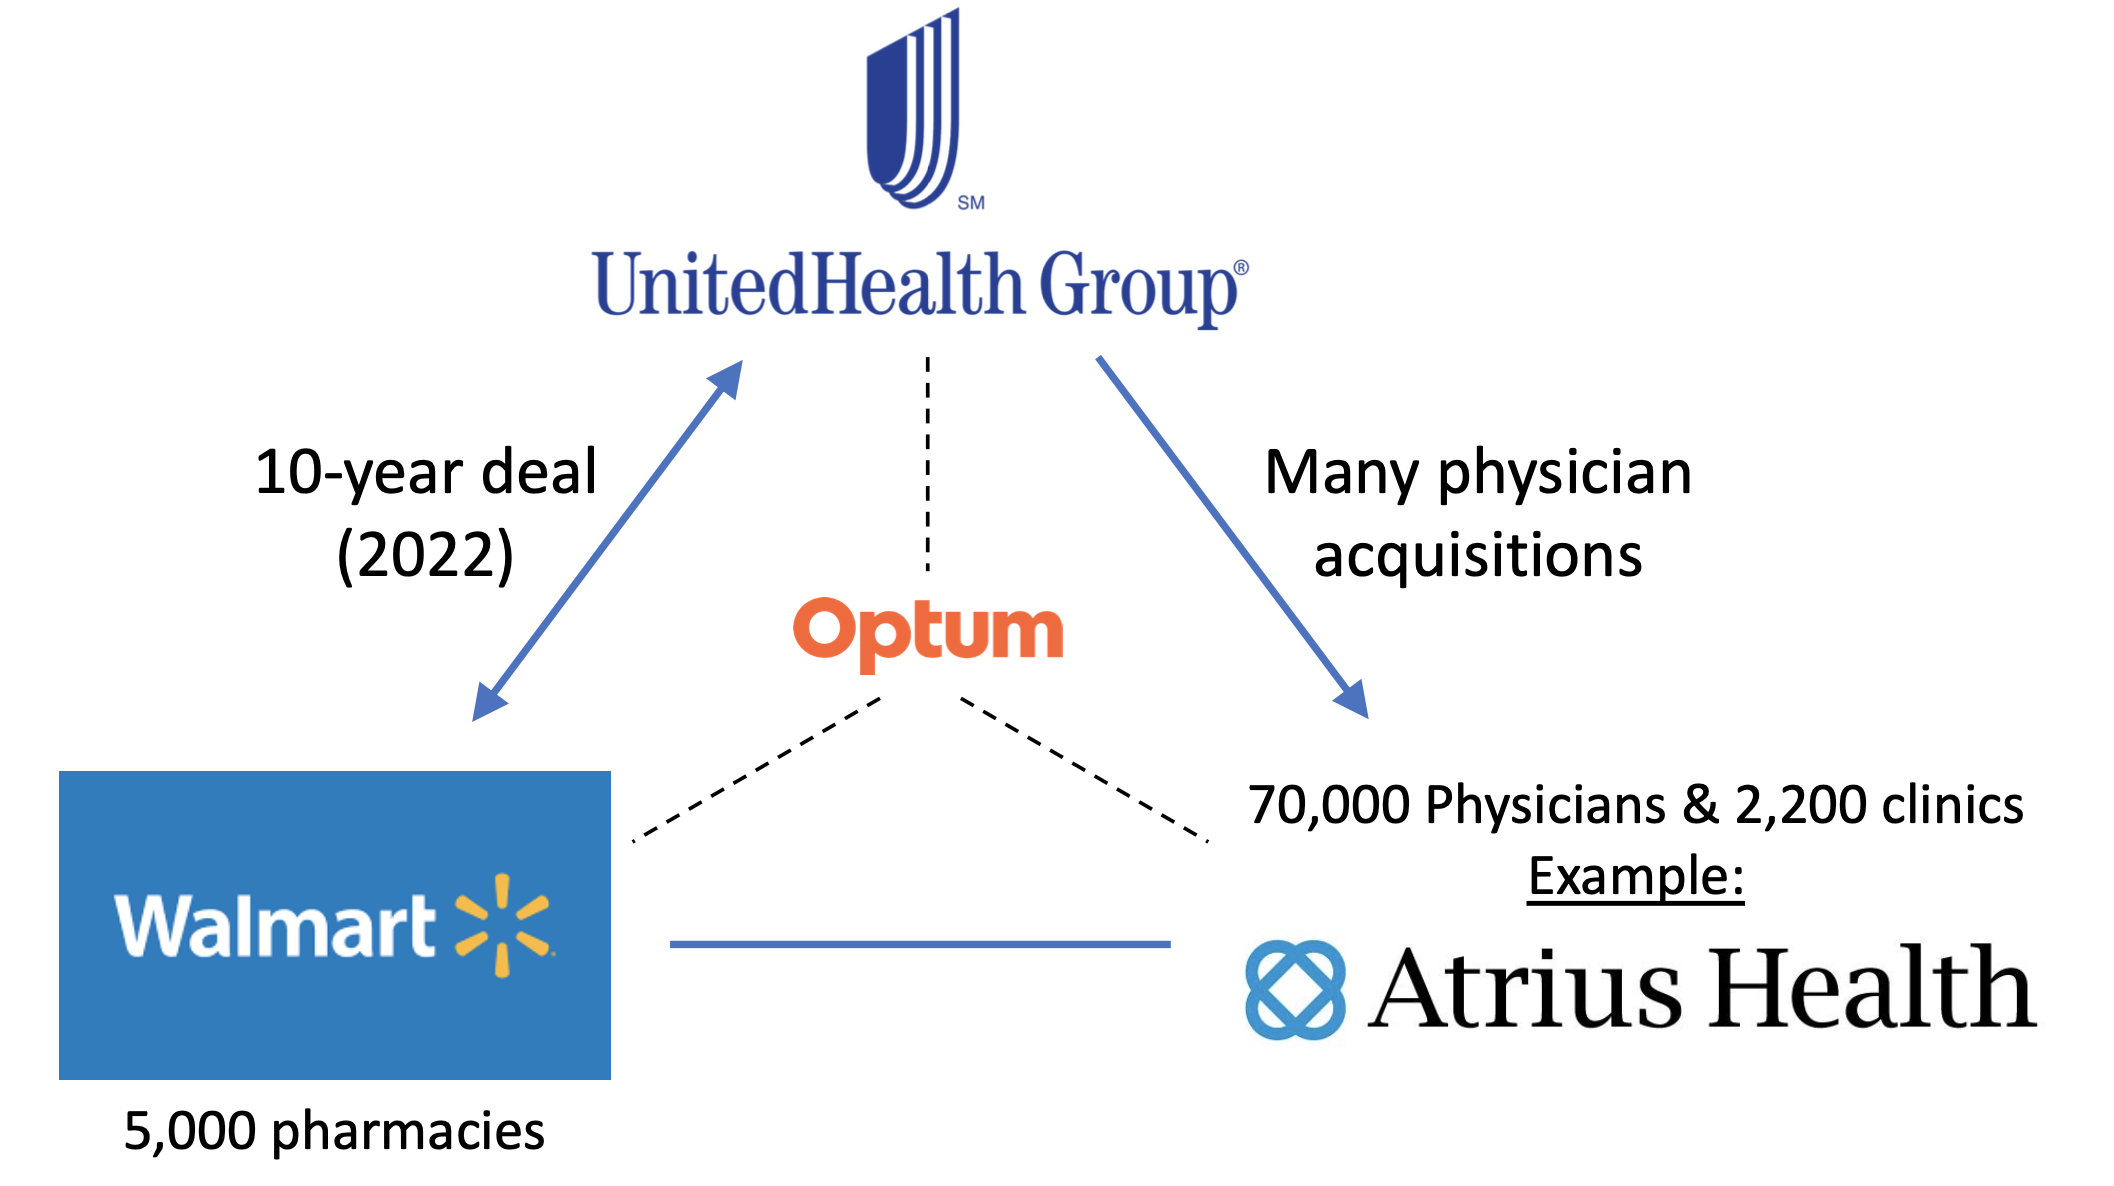 Graphic showing the relationship between UnitedHealth Group, Atrius Health, Walmart, and Optum